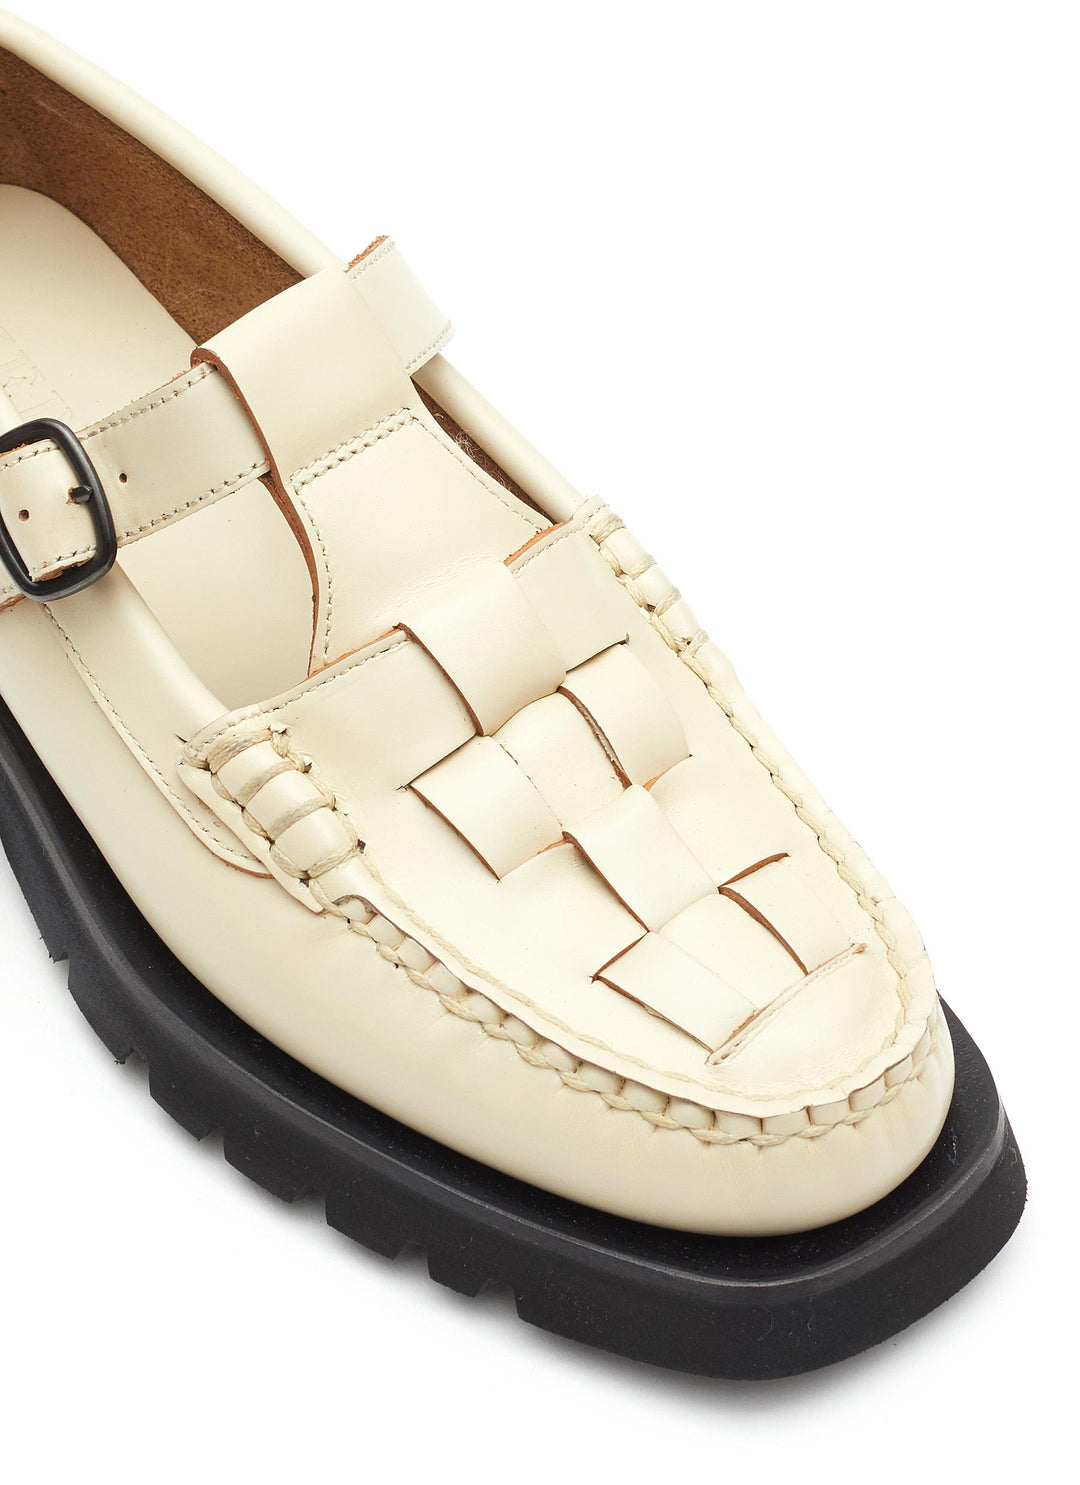 Soller Sport' Flat T-bar Slingback Woven Leaether Loafers